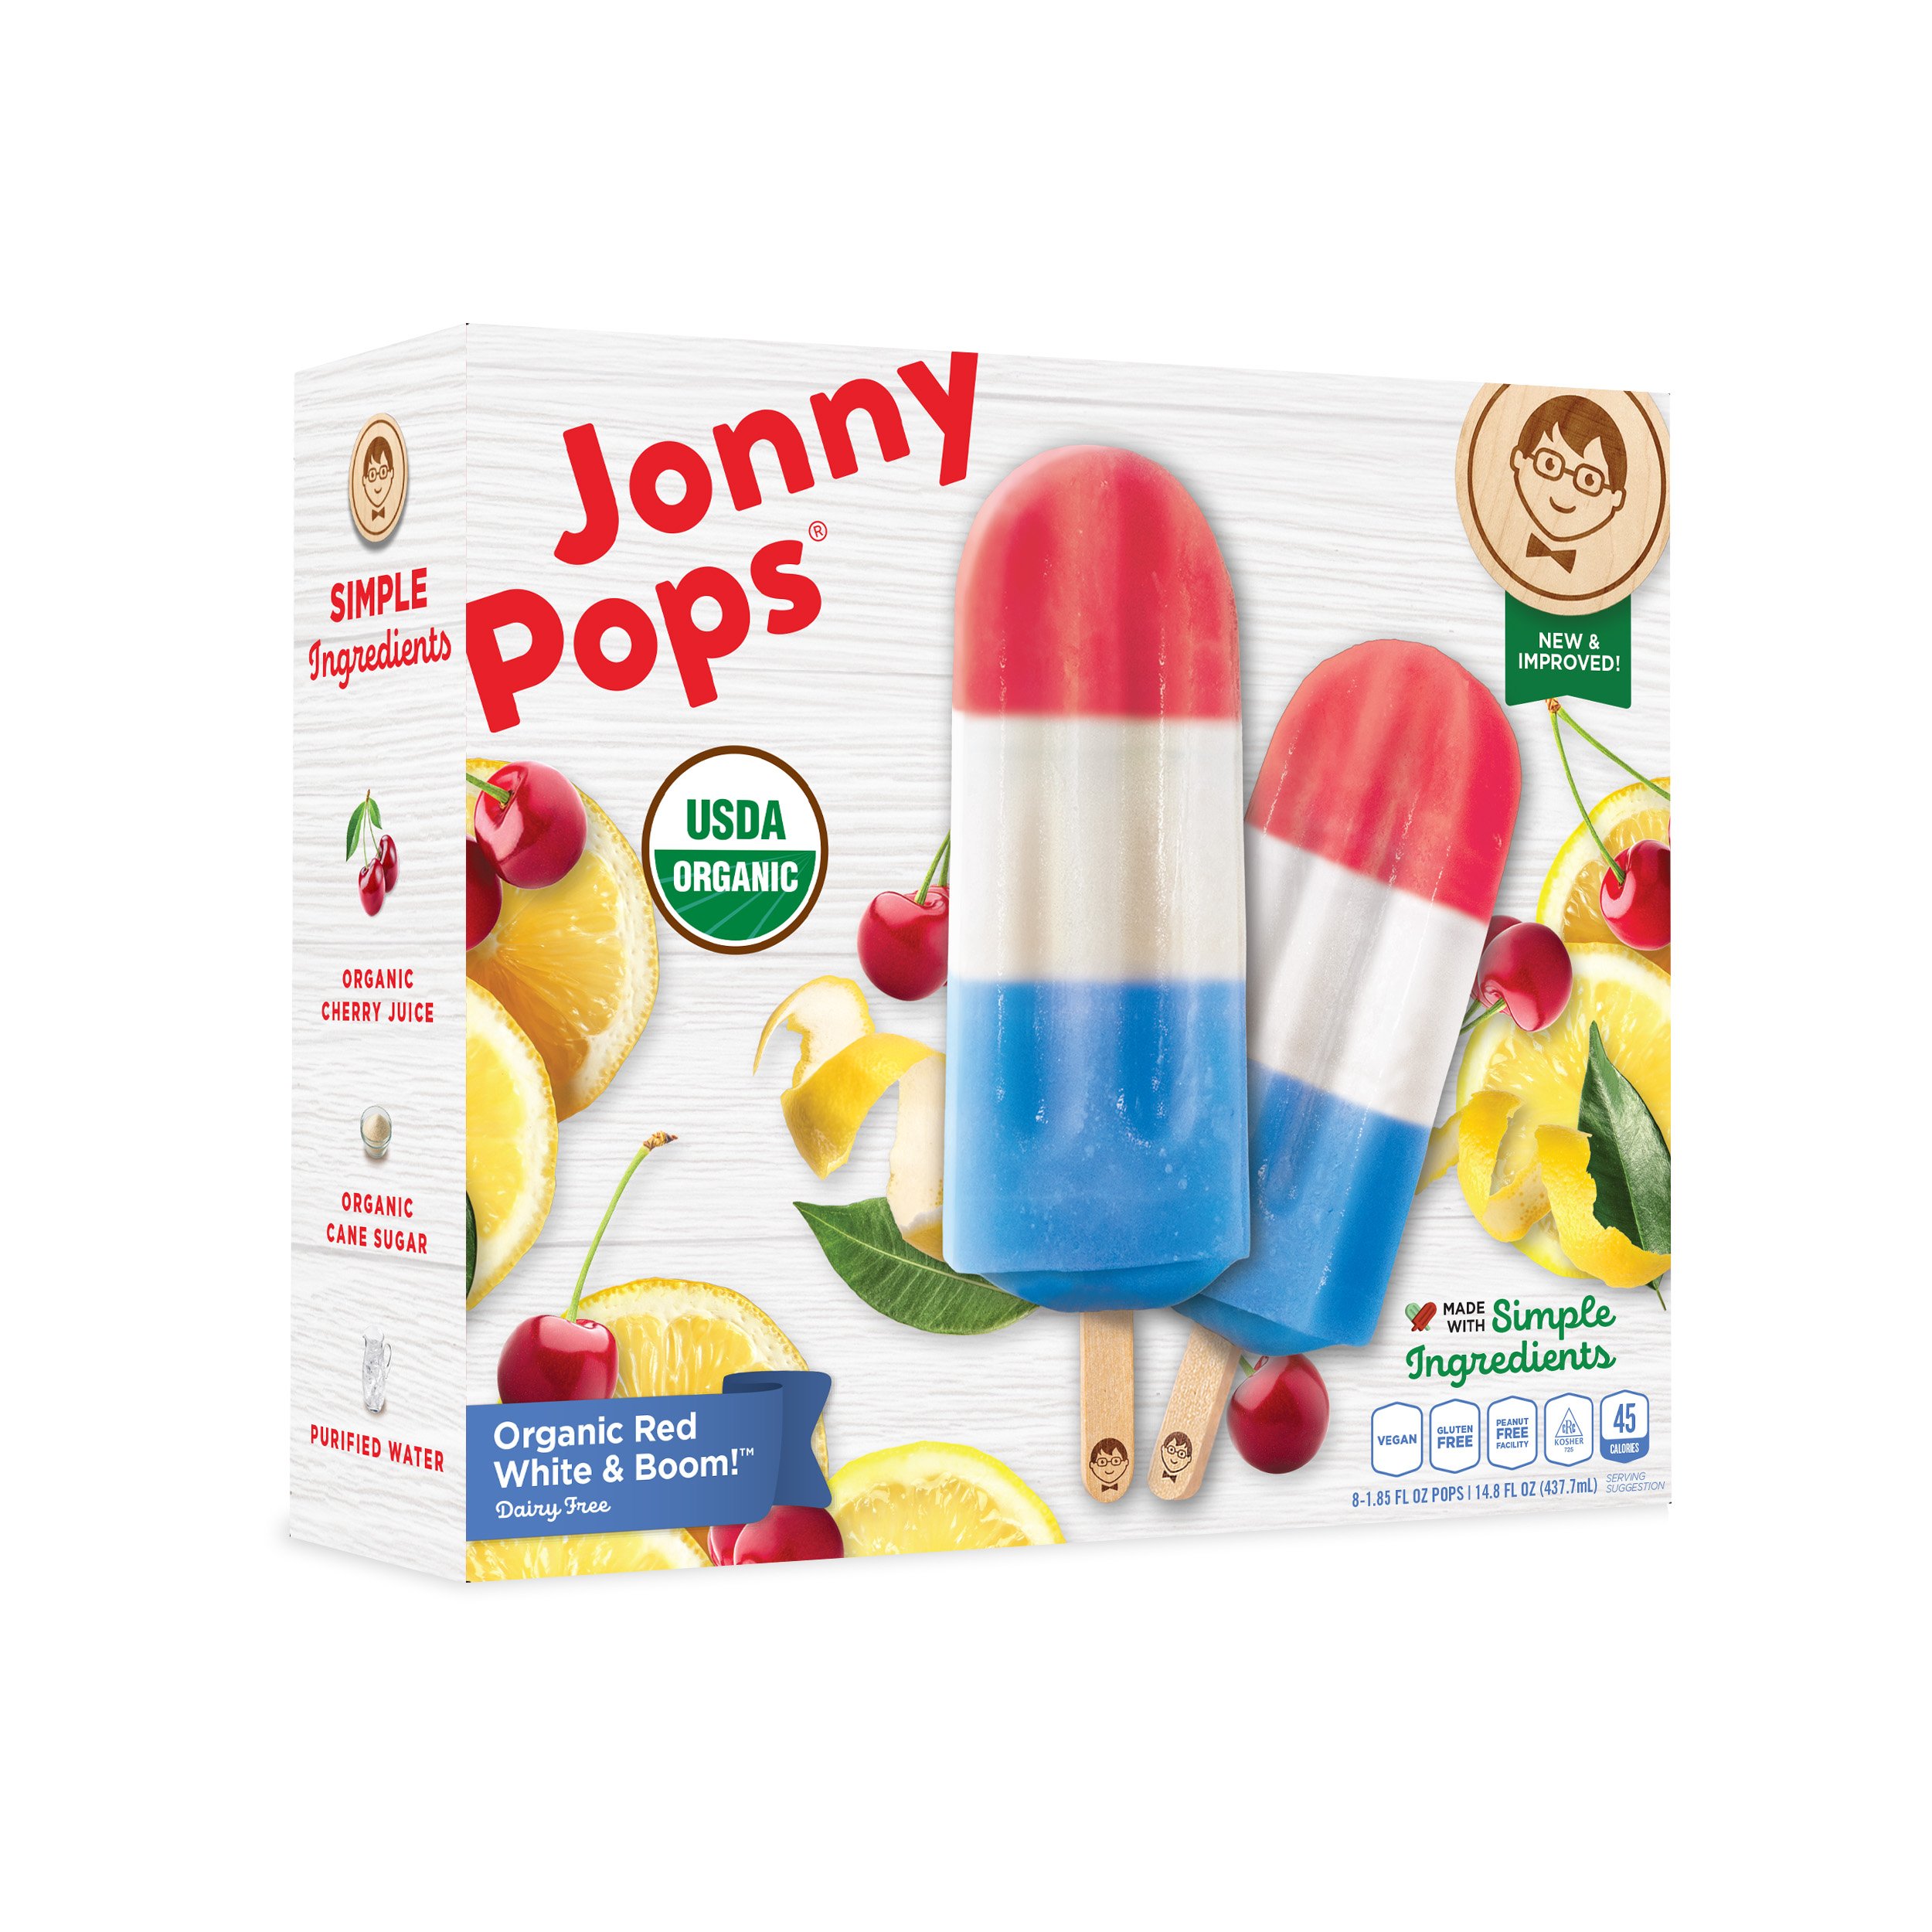 Red, White & Blue Ice Pops - 8 boxes